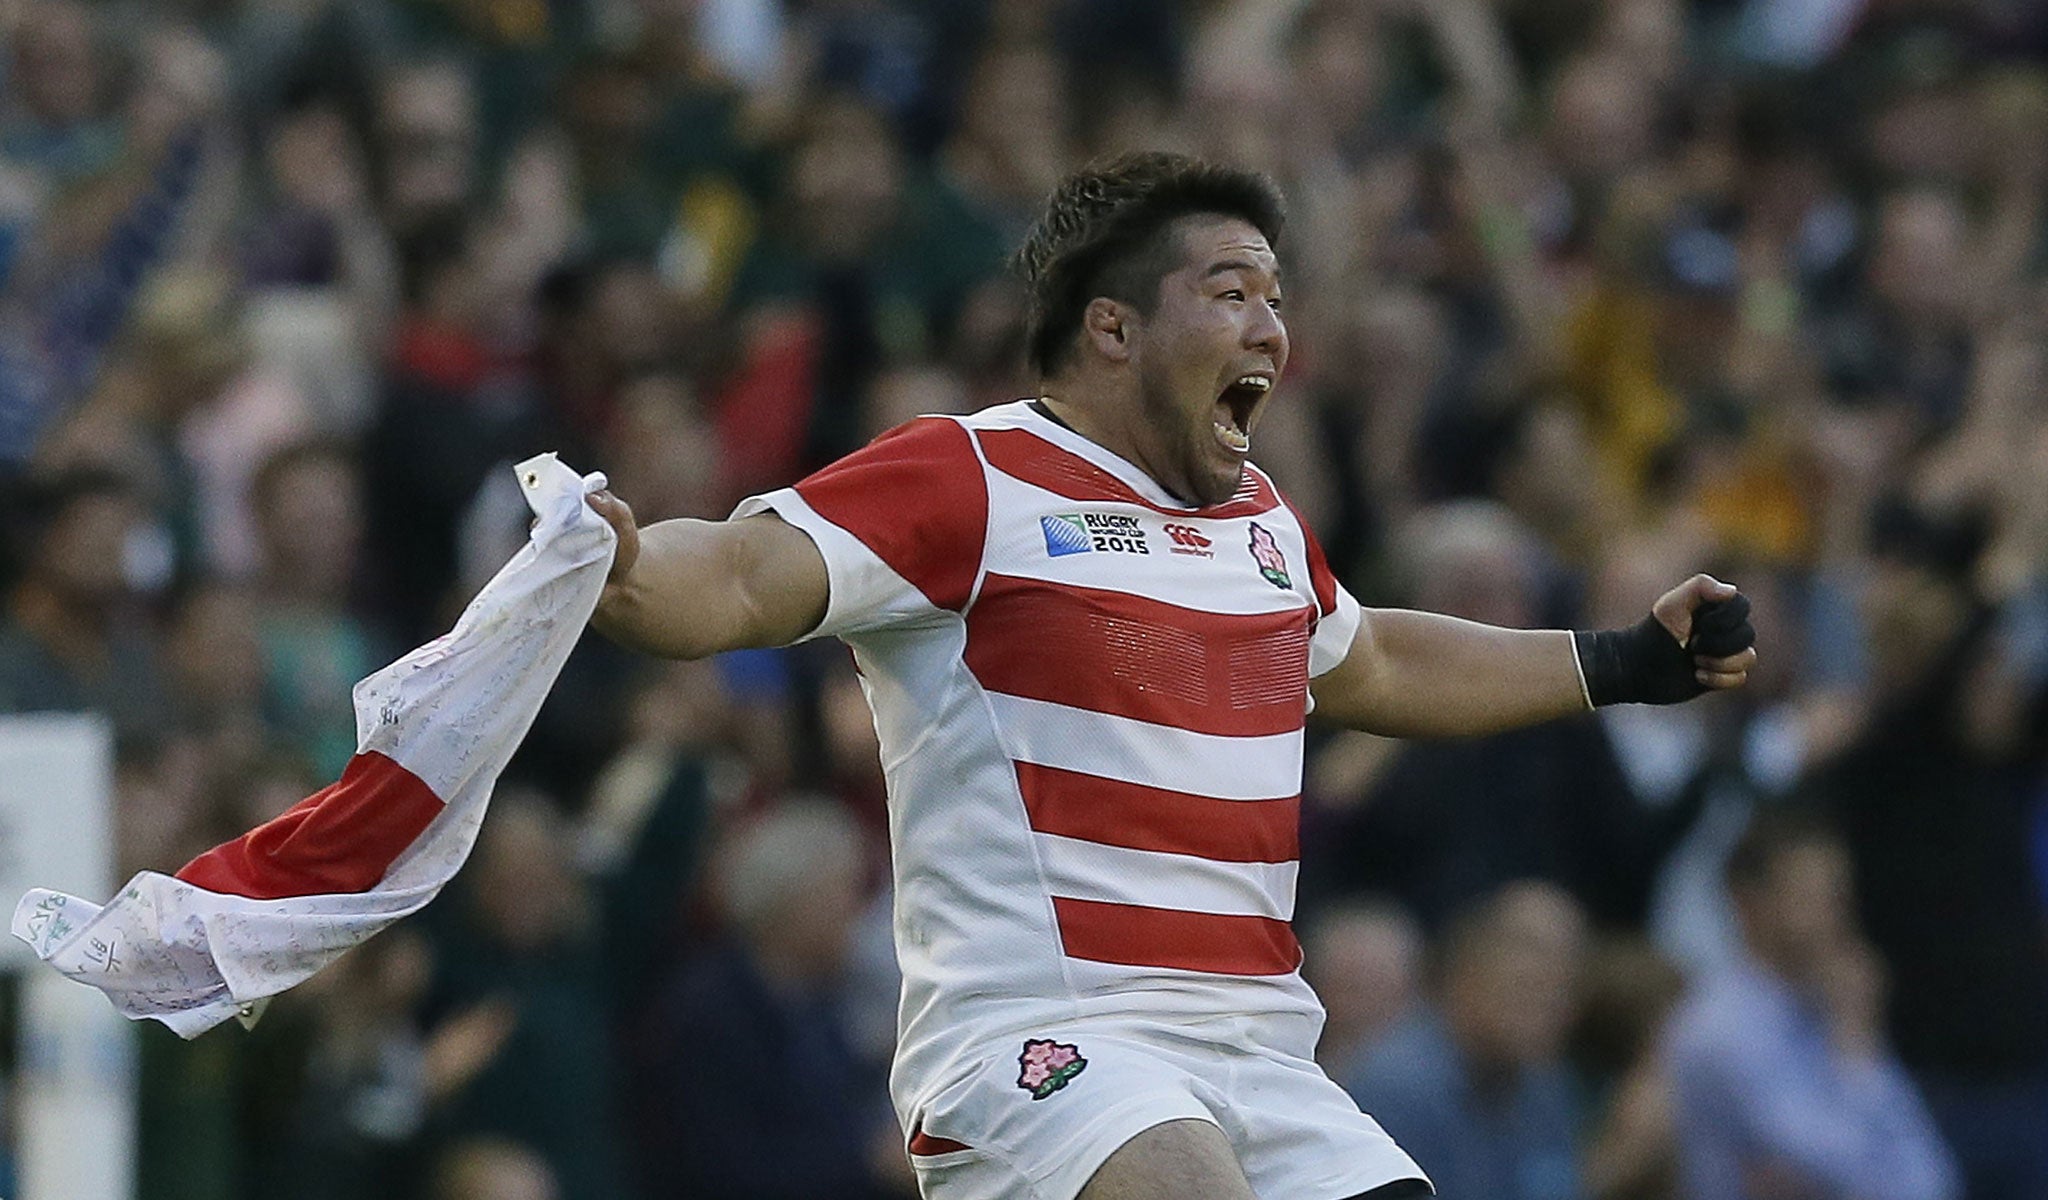 Japan's Kensuke Hatakeyama celebrates victory in the Rugby World Cup Pool B match between South Africa and Japan